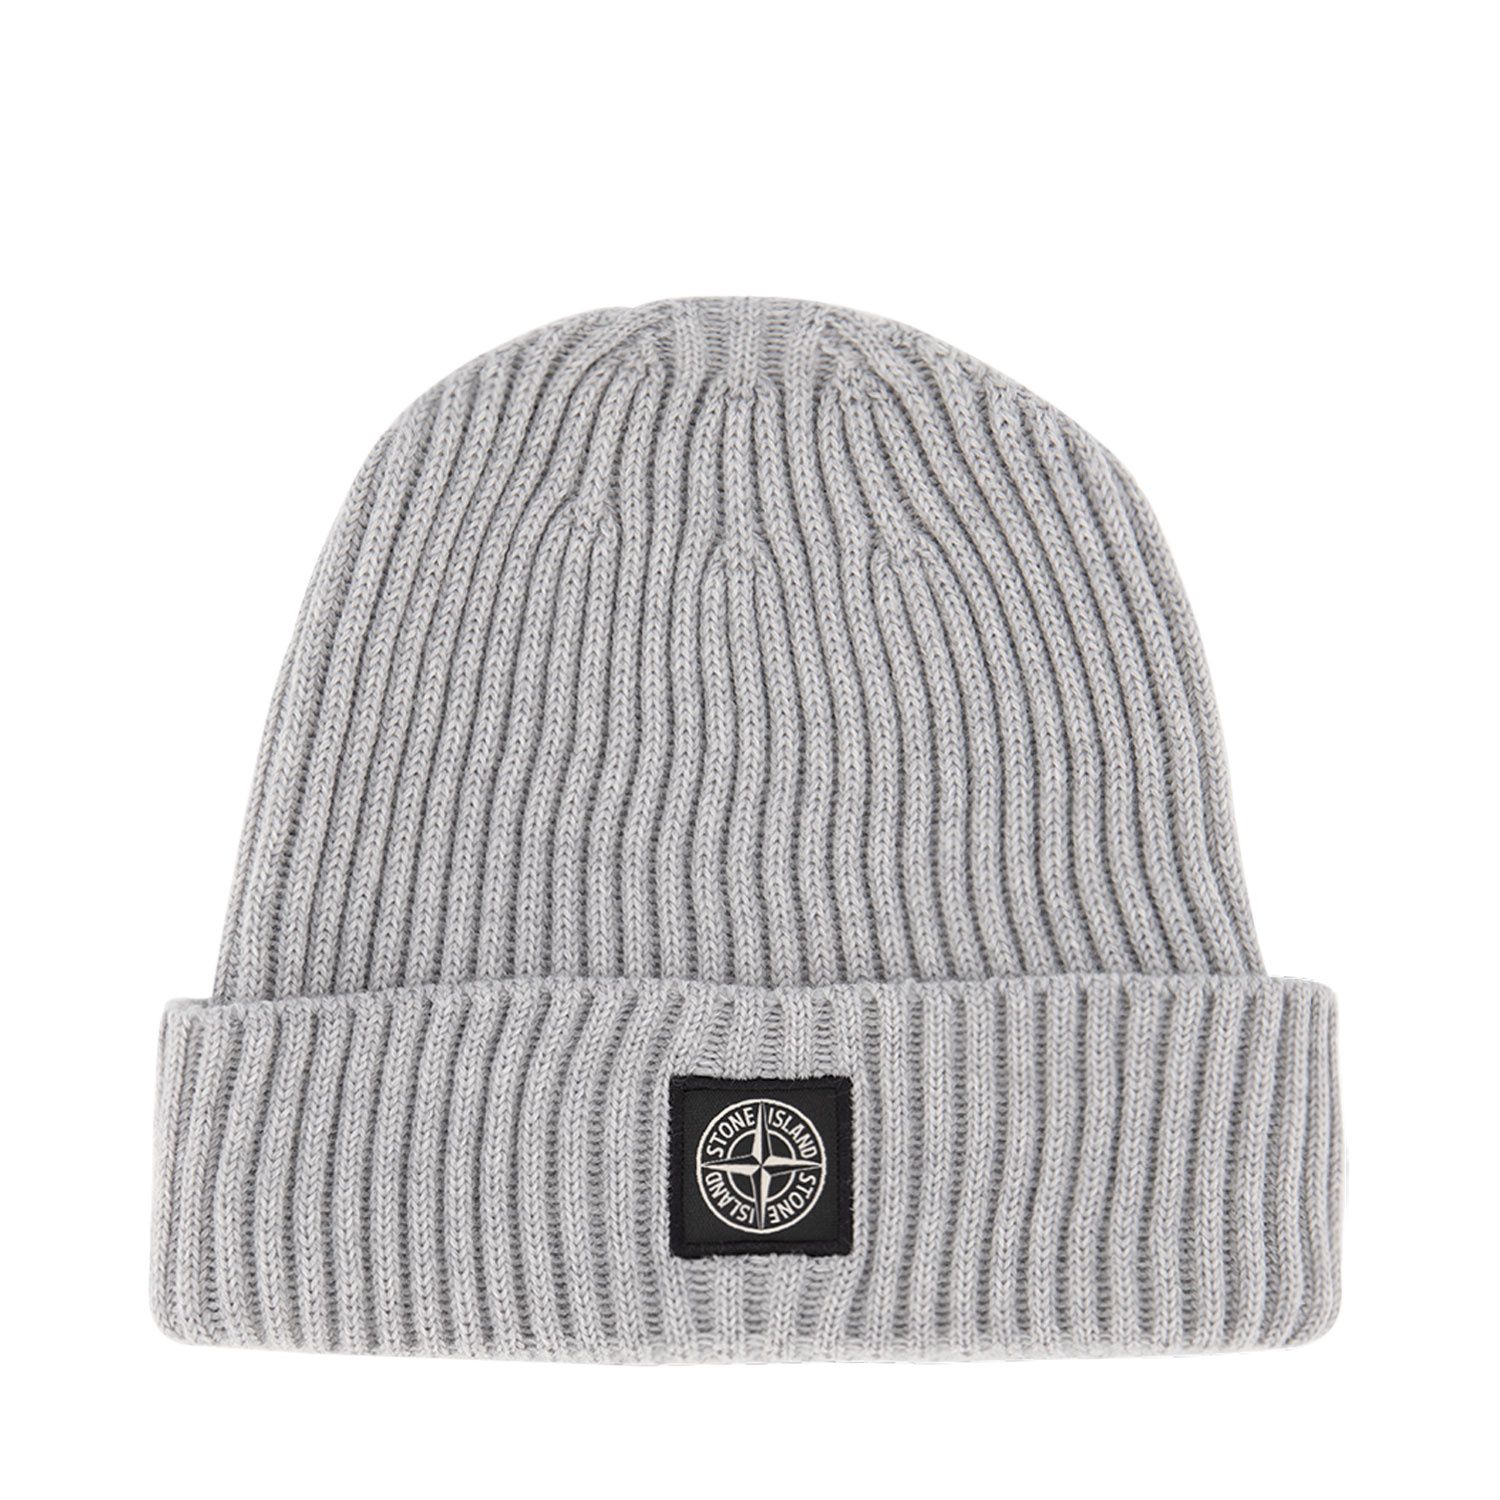 Picture of Stone Island N07A5 kids hat grey